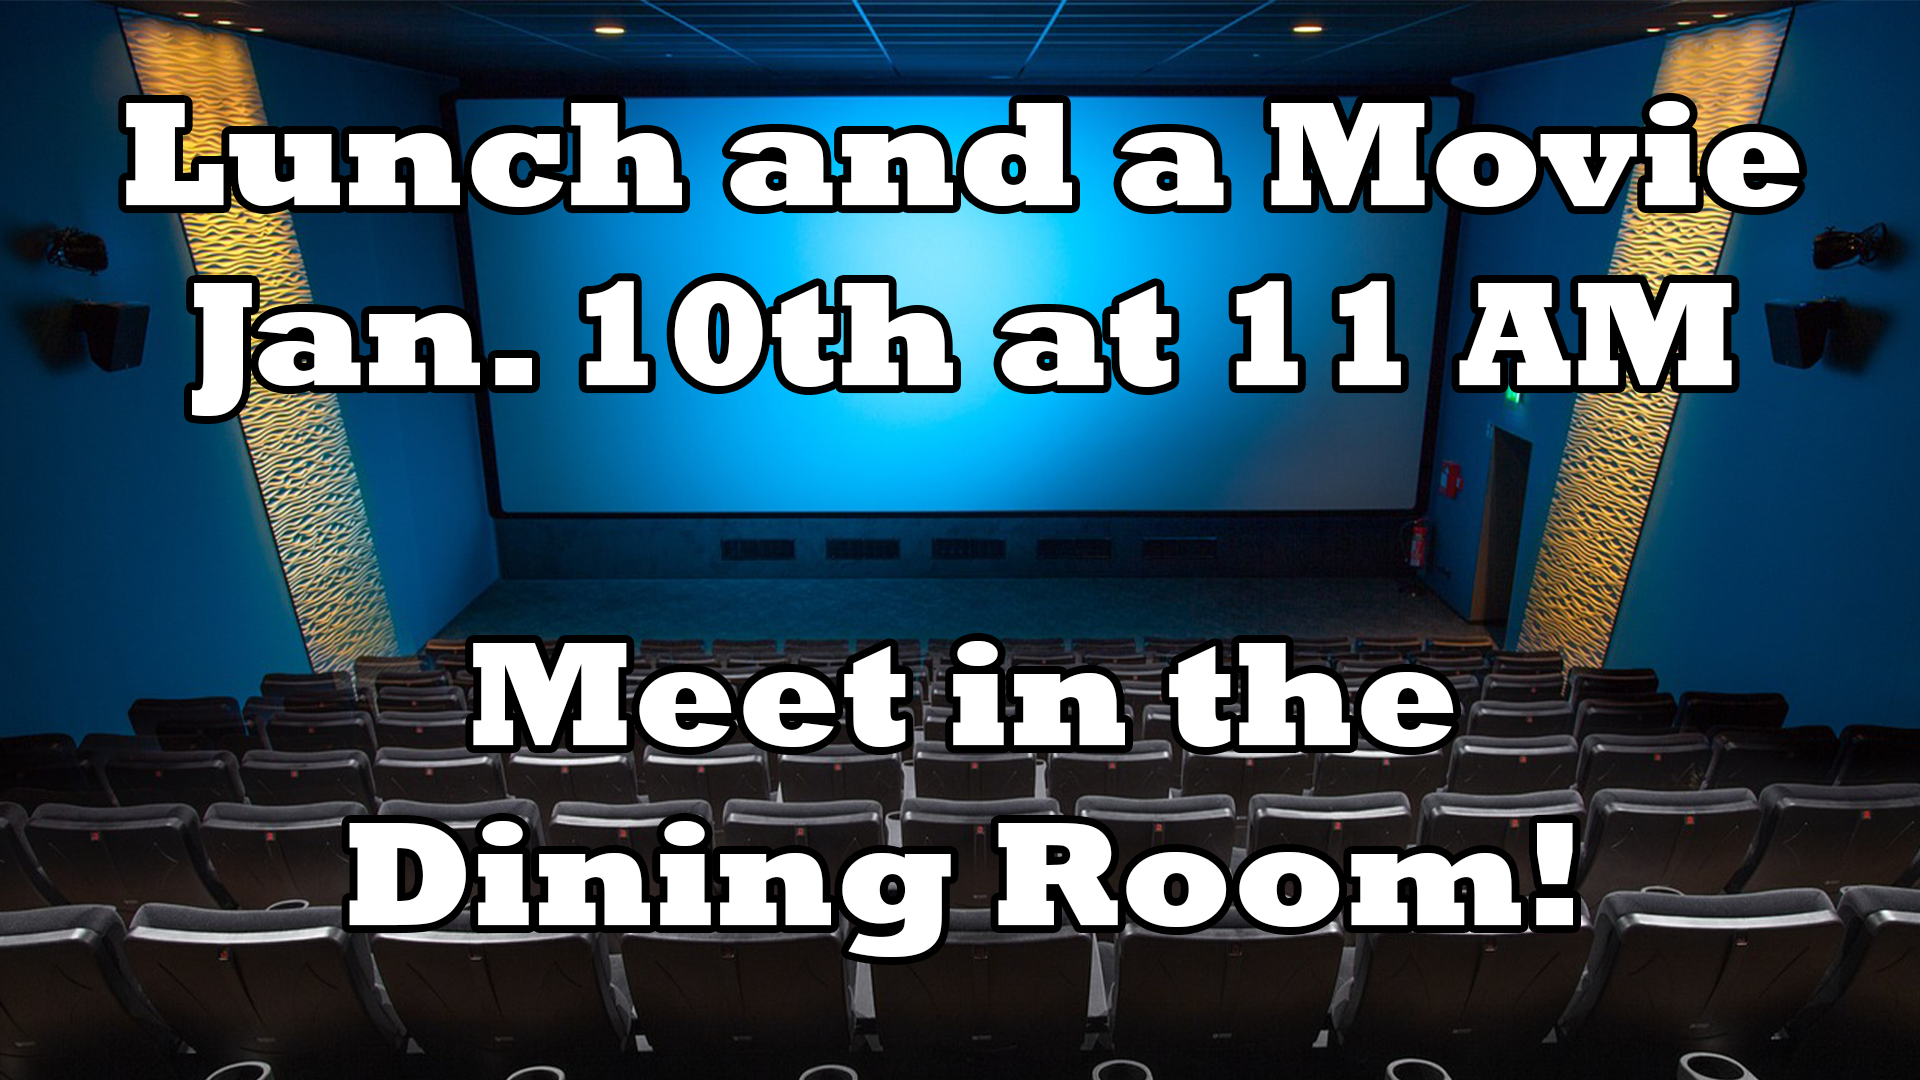 Fee Fee Baptist Church will be having lunch and a movie on Jan 10 at 11 AM in the Dining Room